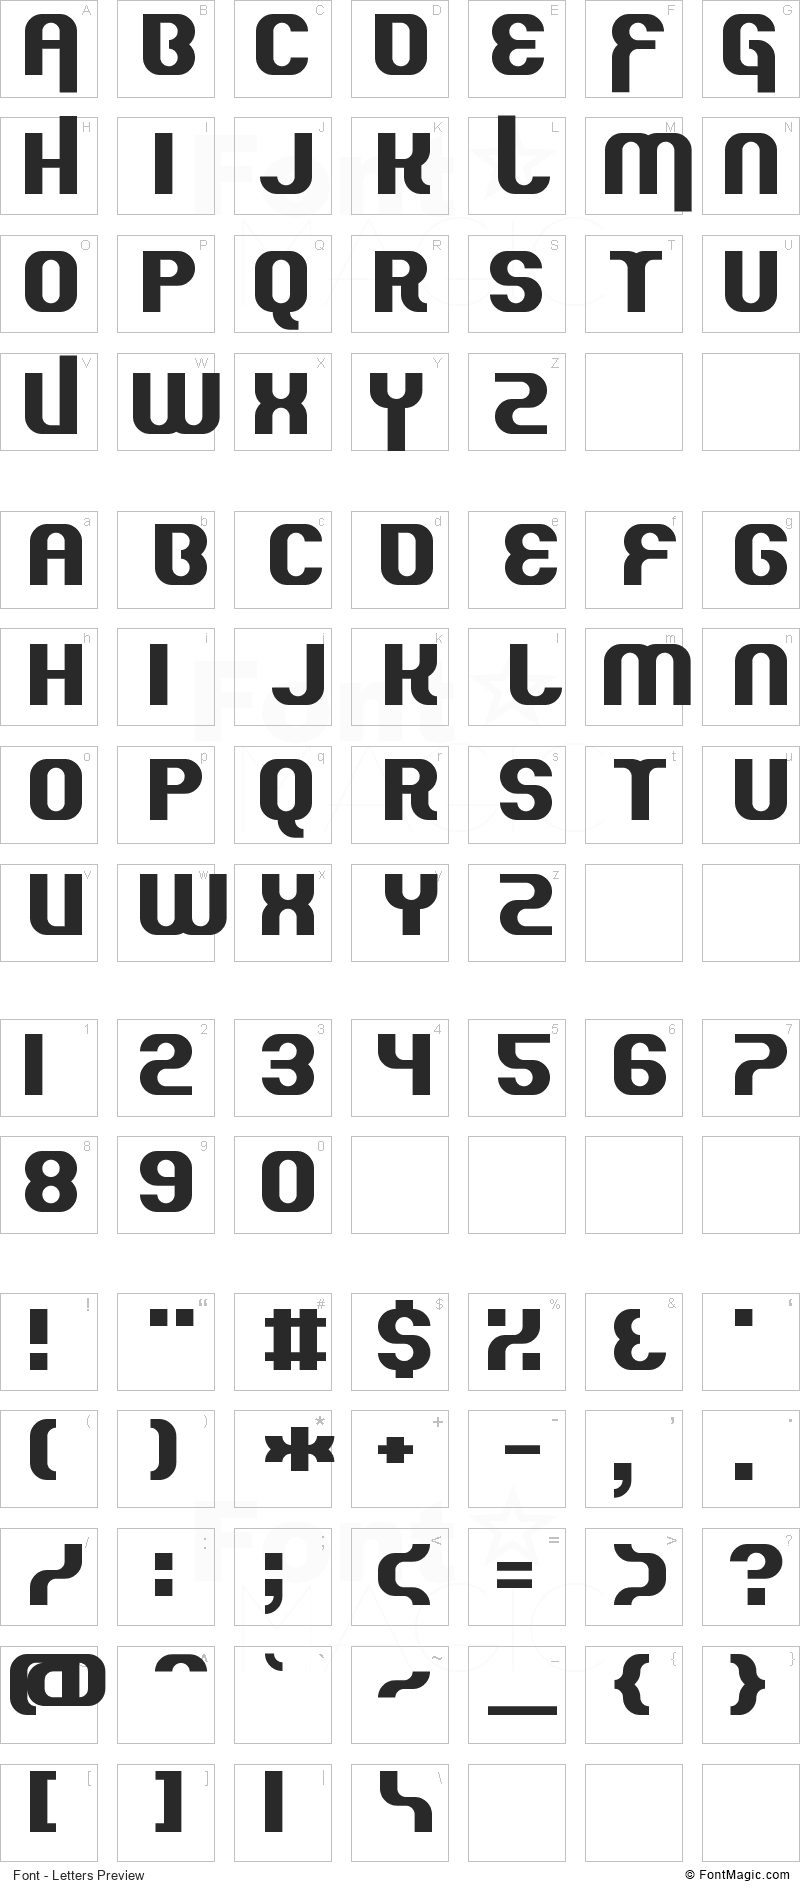 Quous Inno Font - All Latters Preview Chart